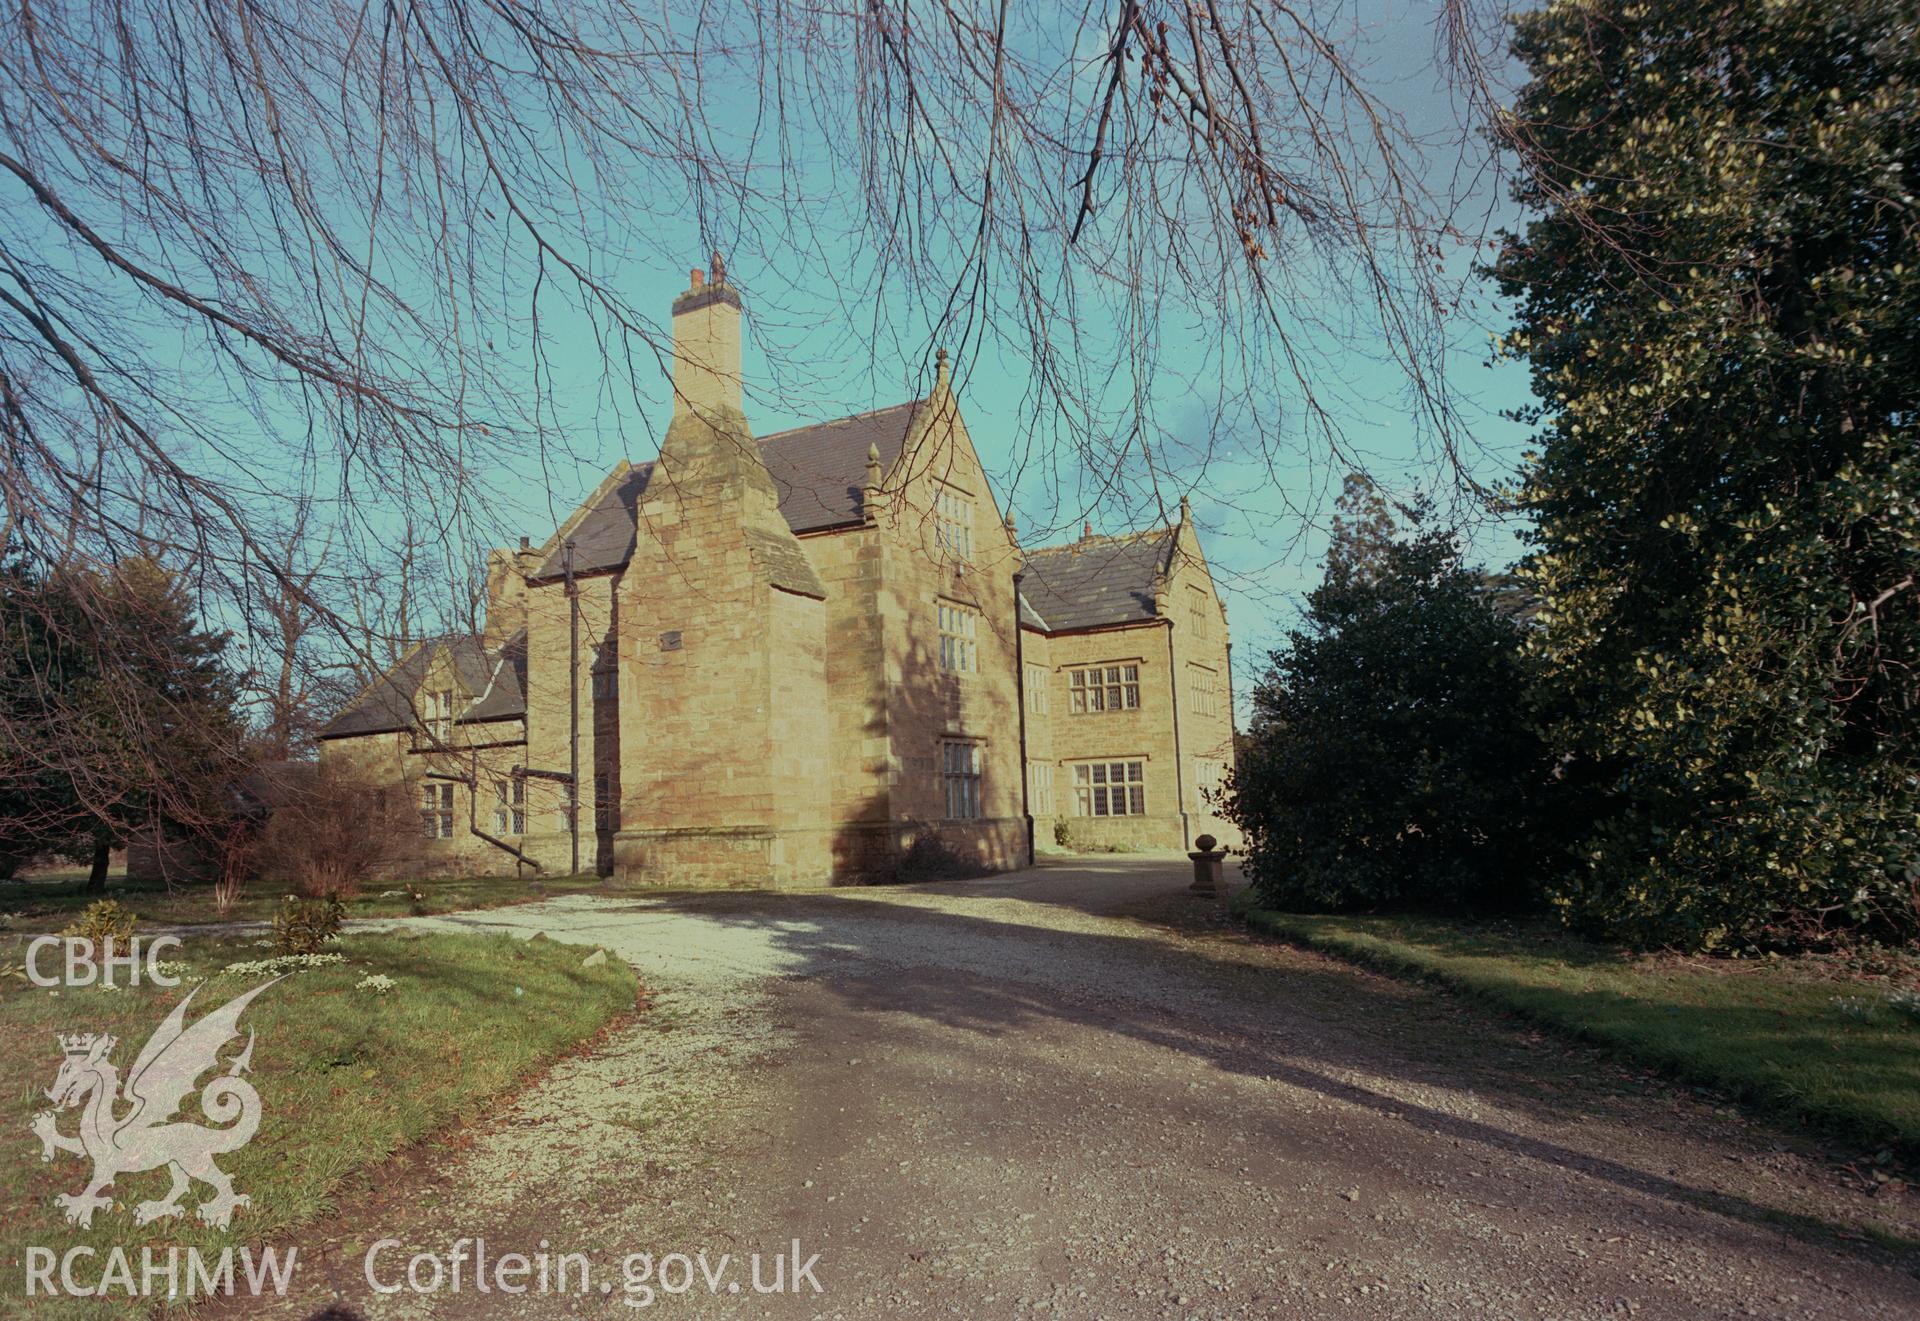 Digital copy of a colour negative showing an exterior view of Pentre Halkyn taken by RCAHMW.